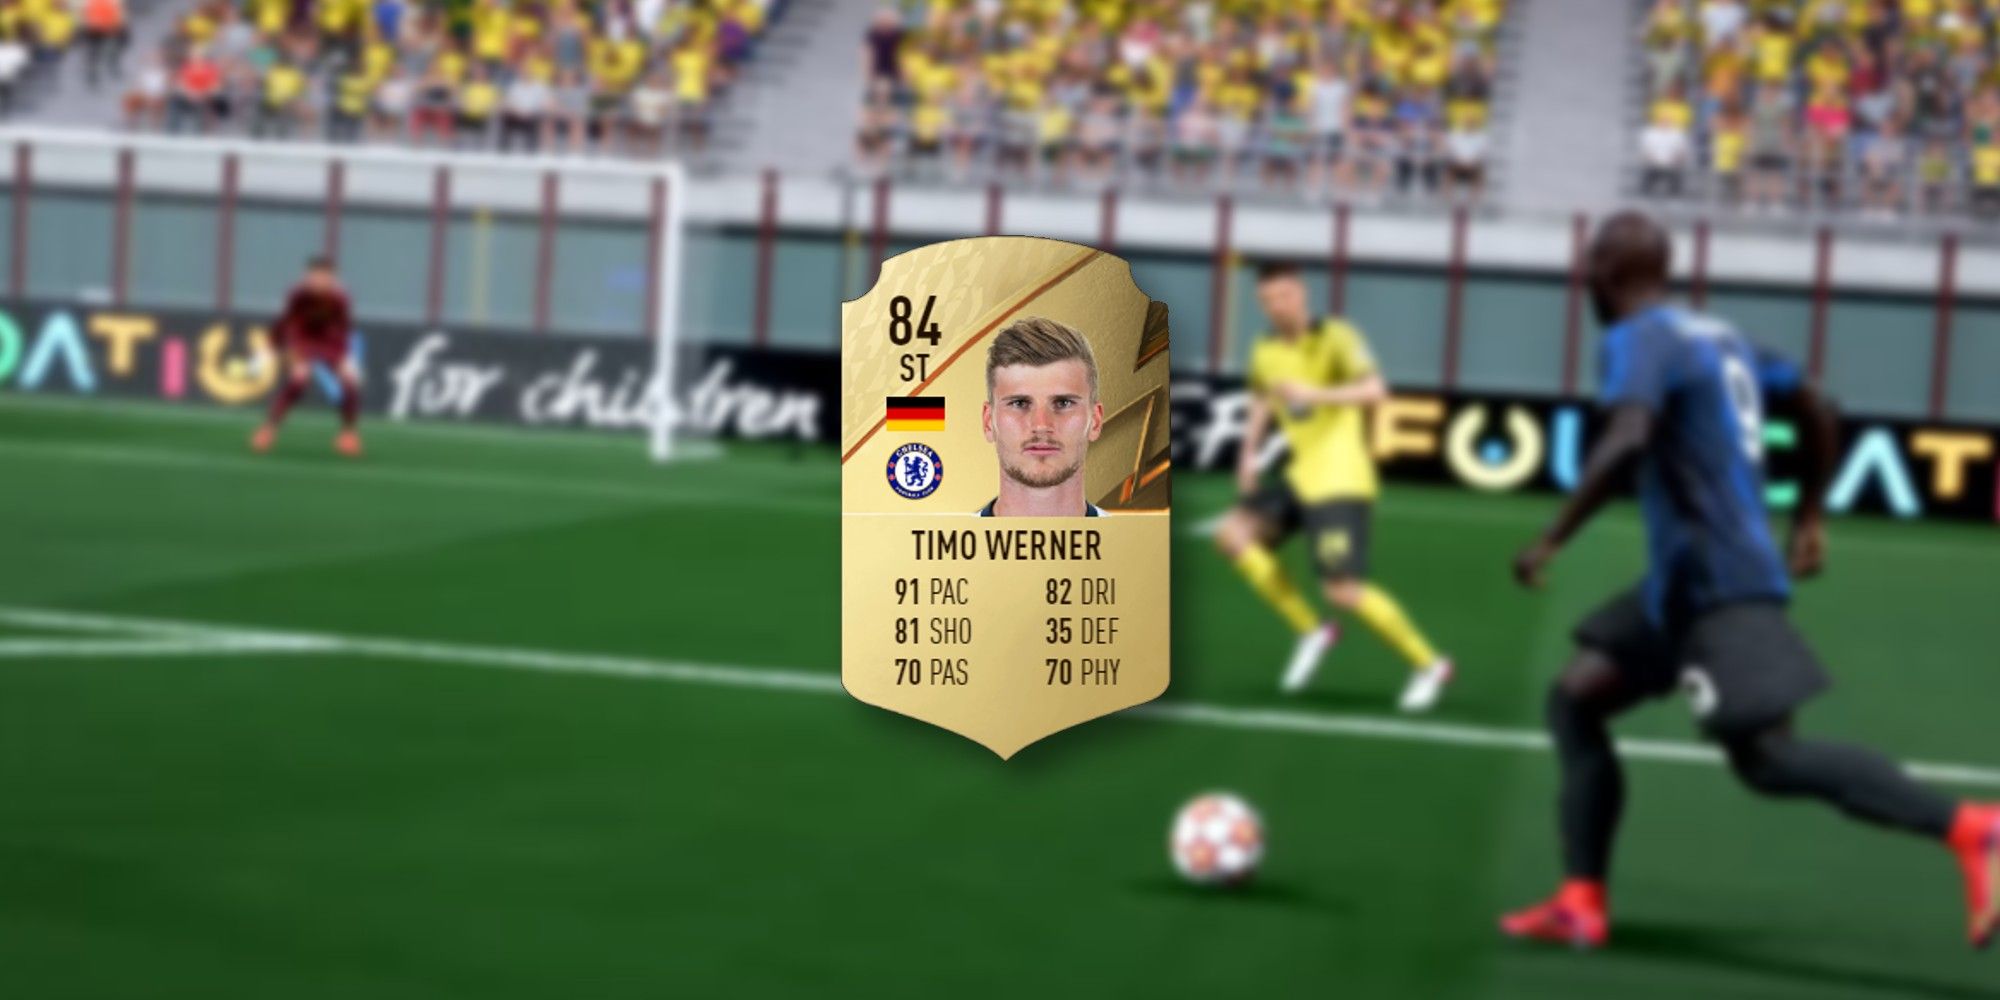 FIFA 22 timo werner card